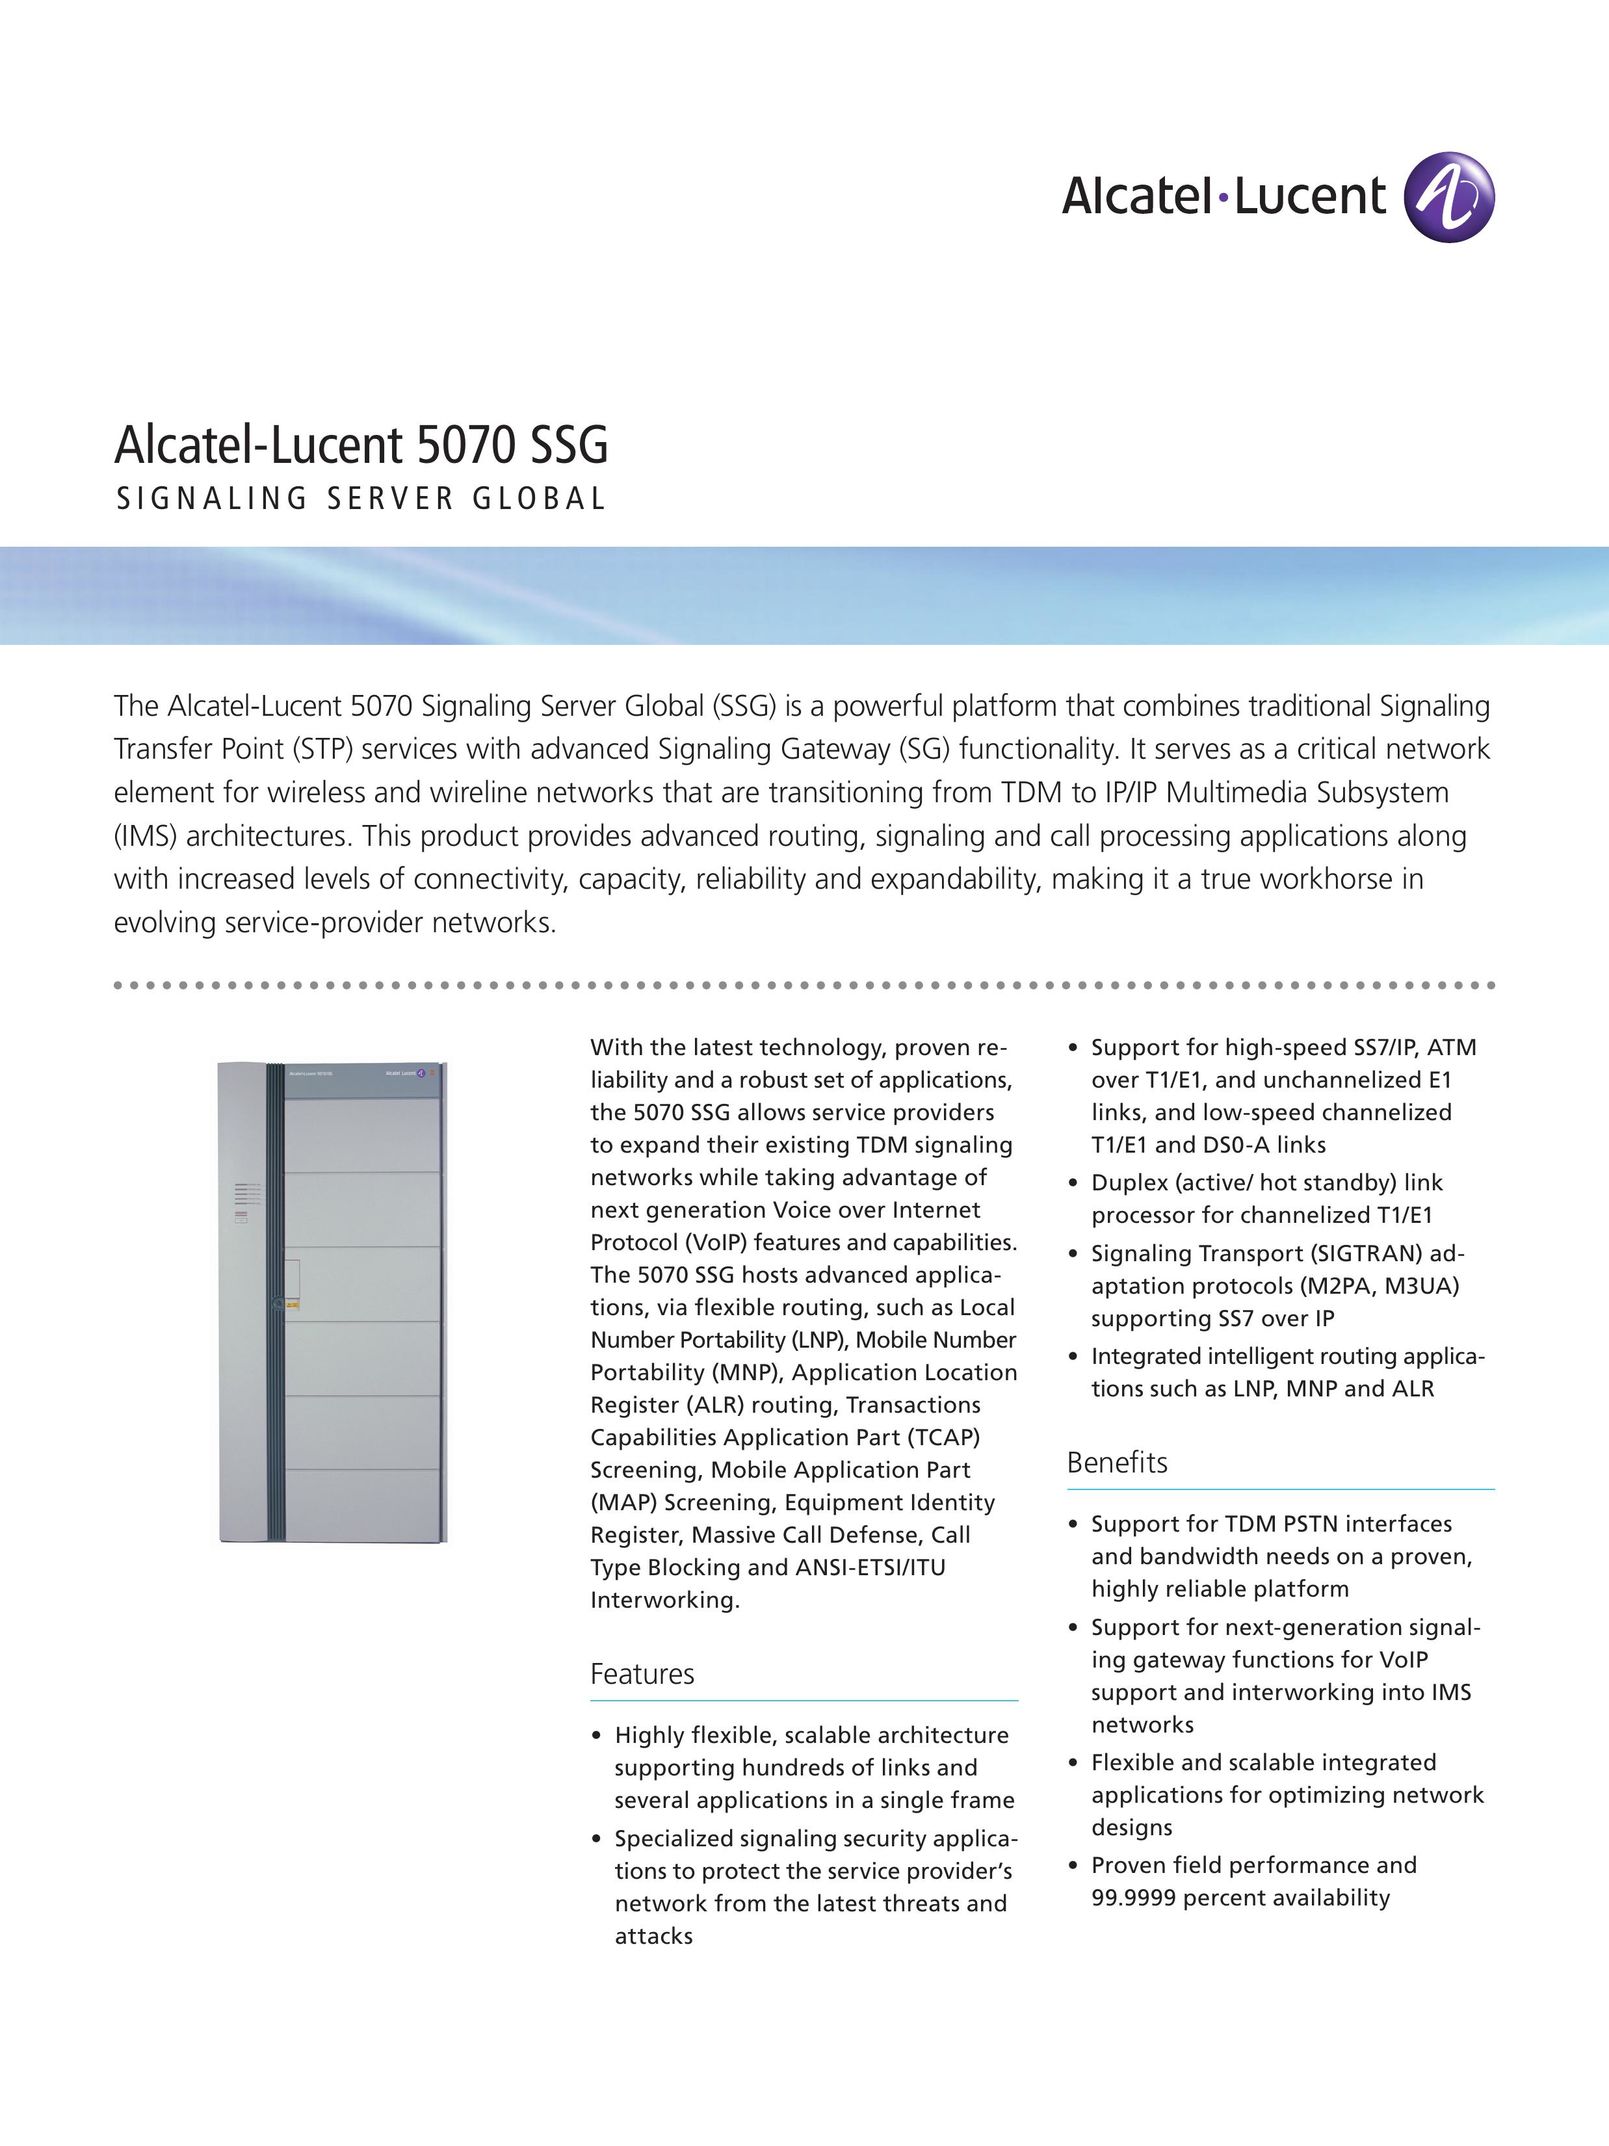 Alcatel-Lucent 5070 SSG Network Card User Manual